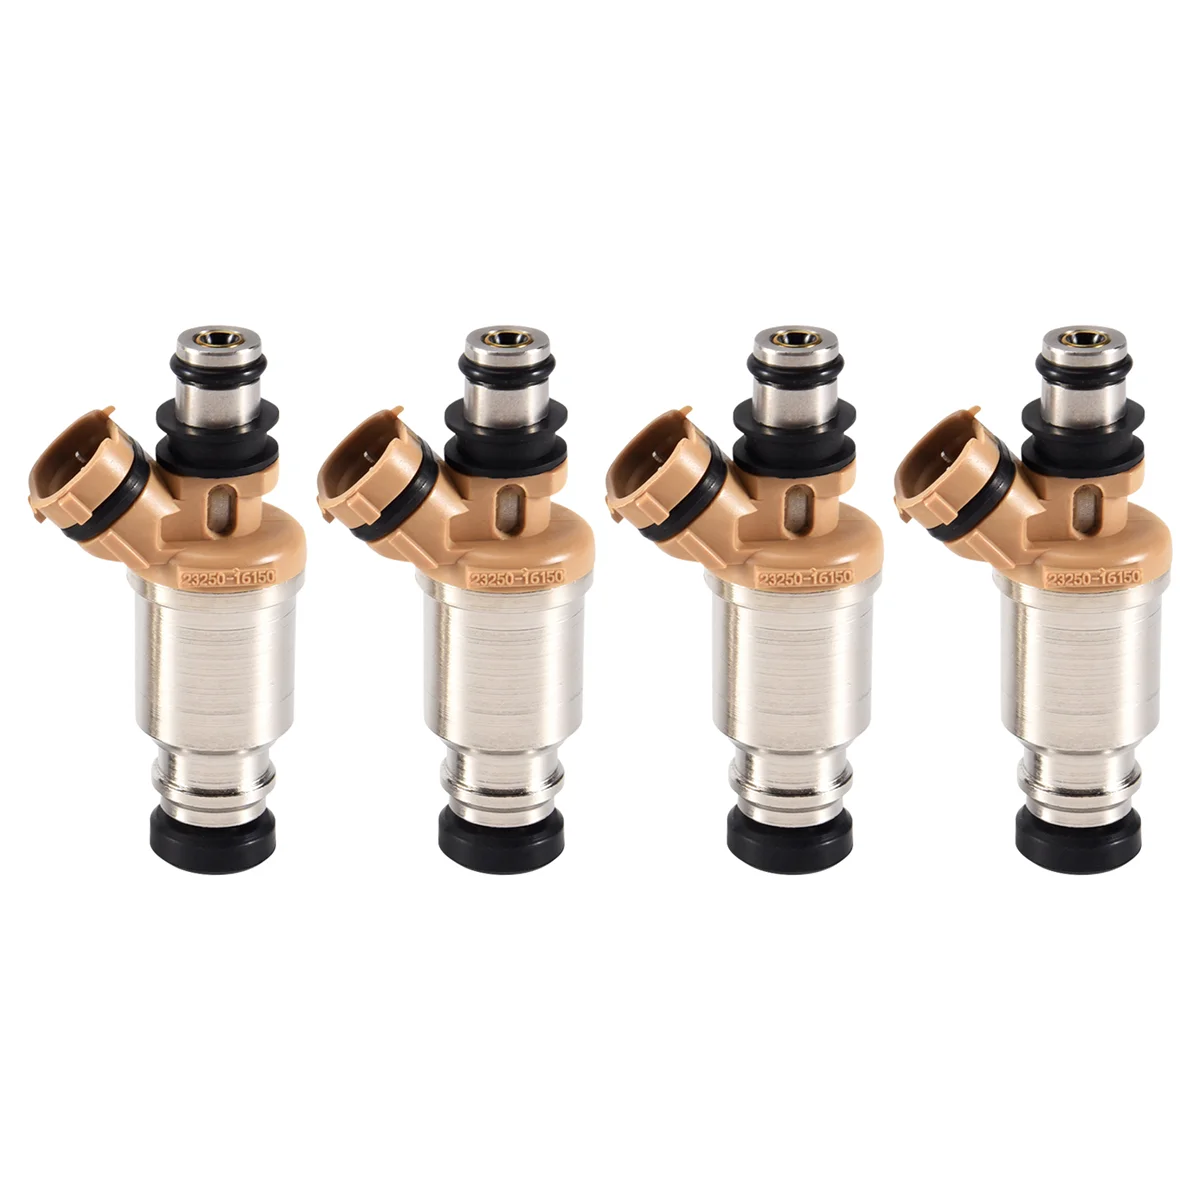 

4Pcs/Lot 23250-16150 Fuel Injector Nozzle for Toyota Corolla AE110 4AFE 5AFE 23209-16150